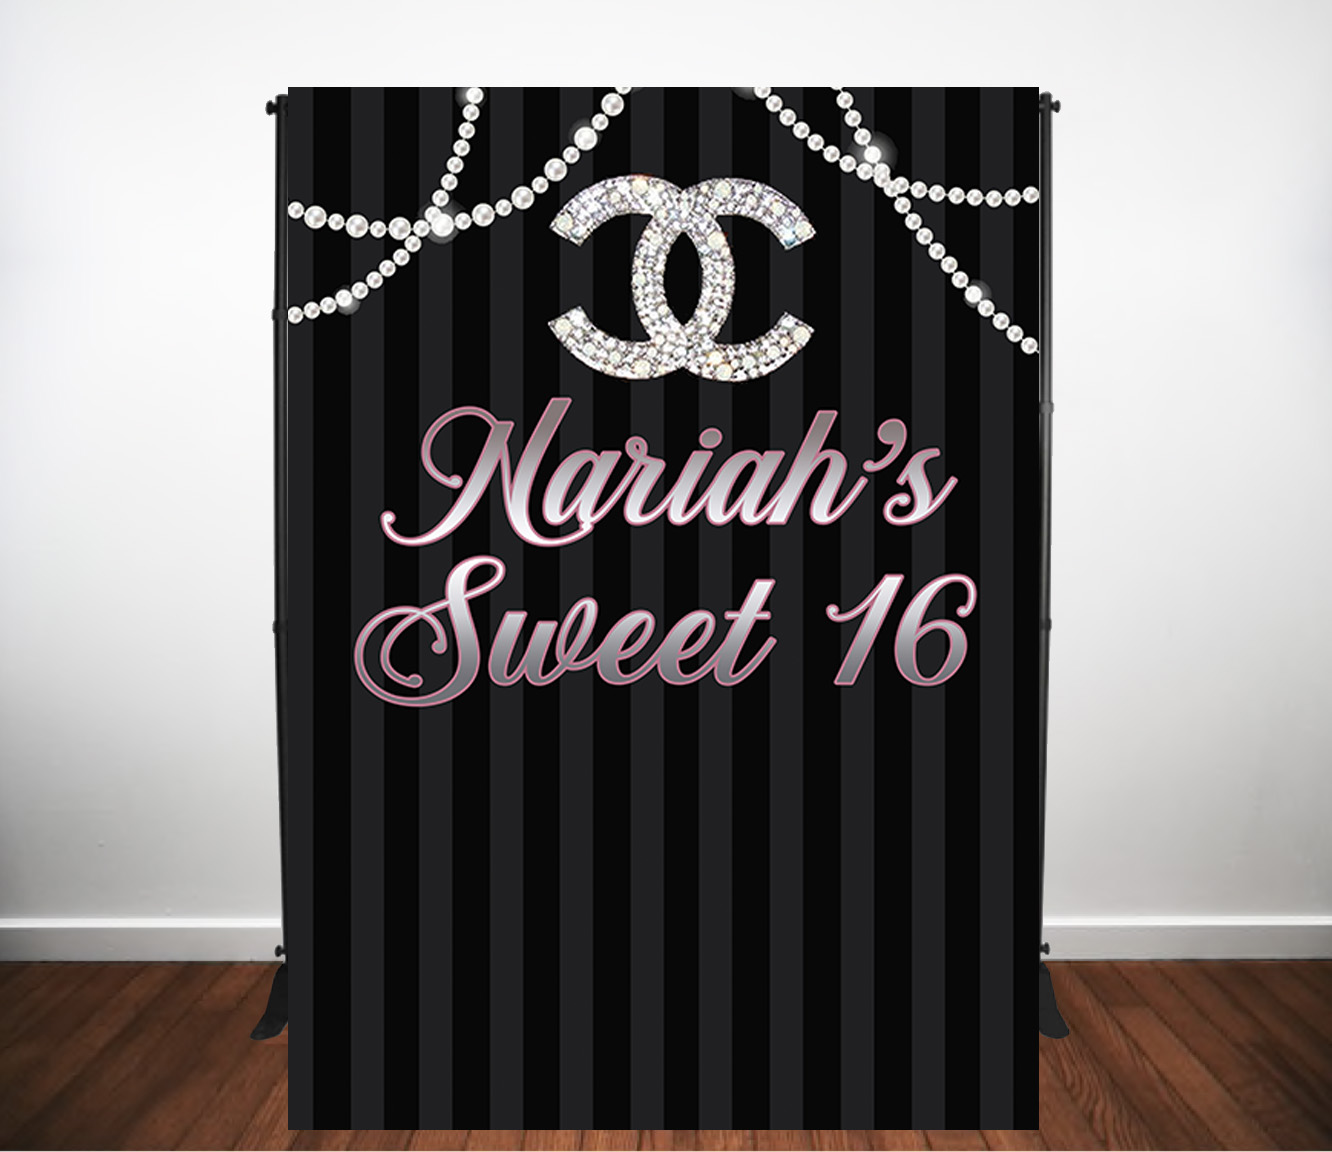 11 Bougie Chanel Party Ideas To Keep It Classy - Peerspace